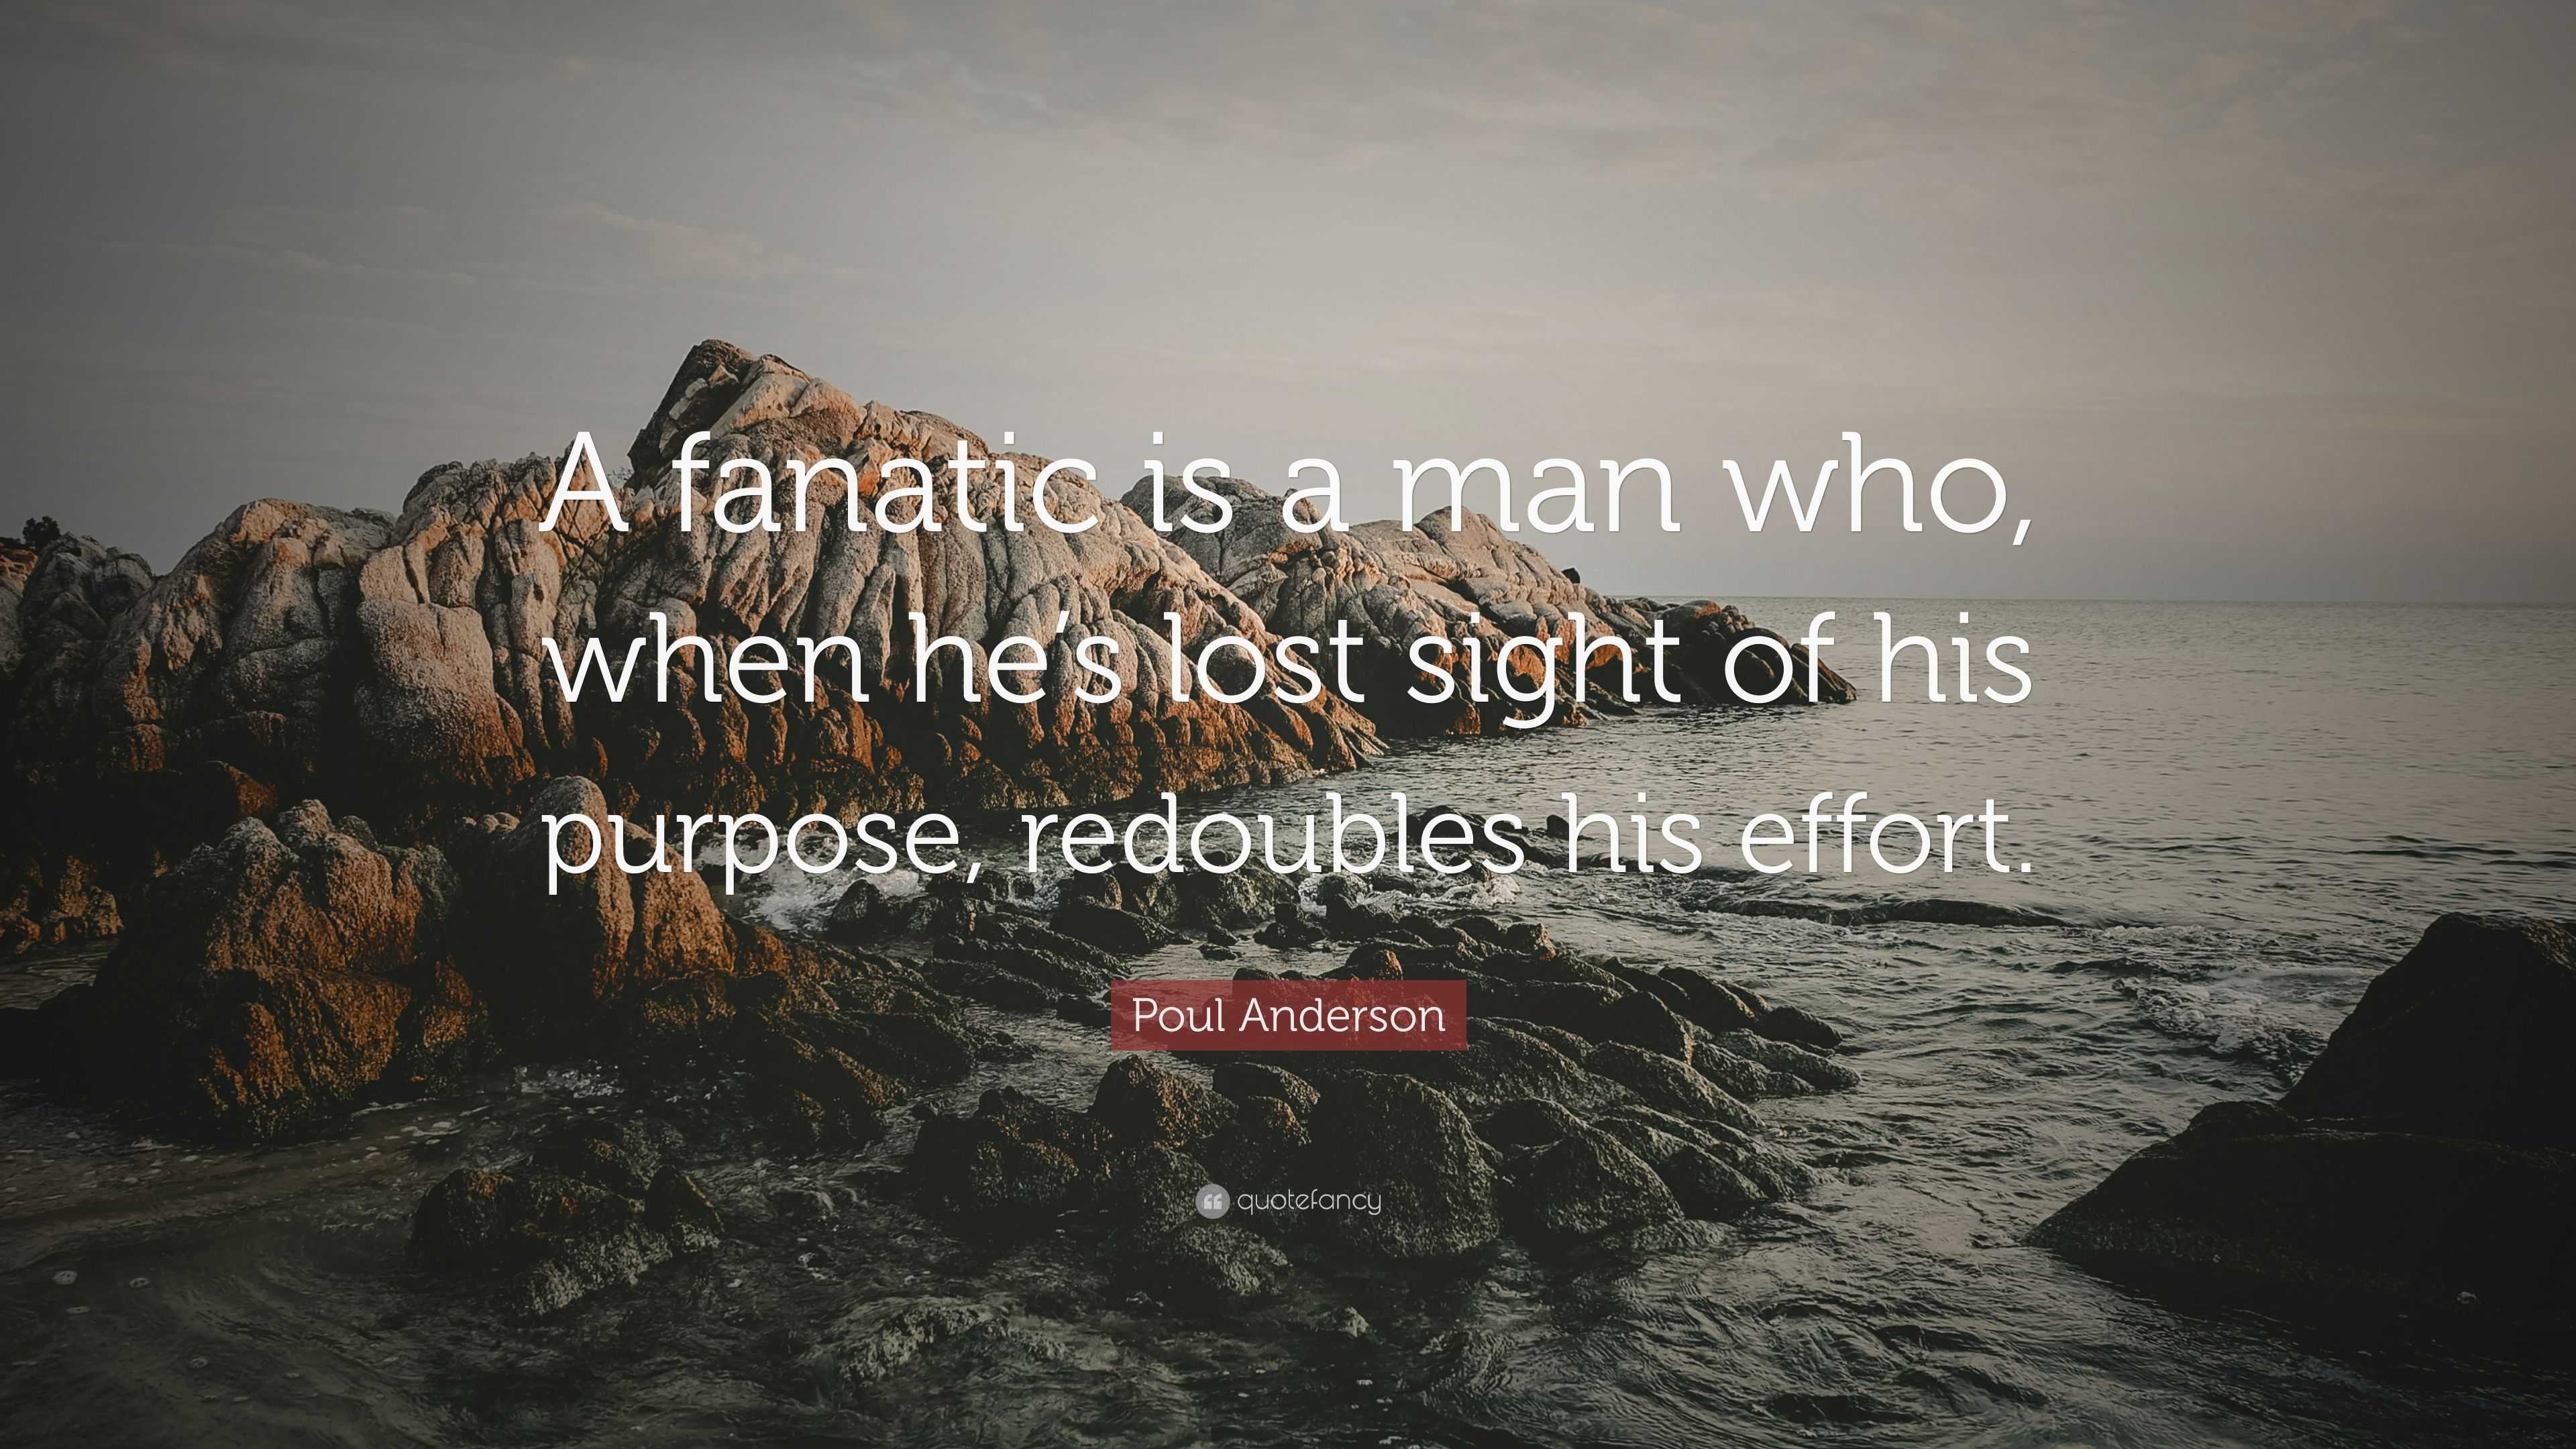 Poul Anderson Quote: “A fanatic is a man who, when he’s lost sight of ...